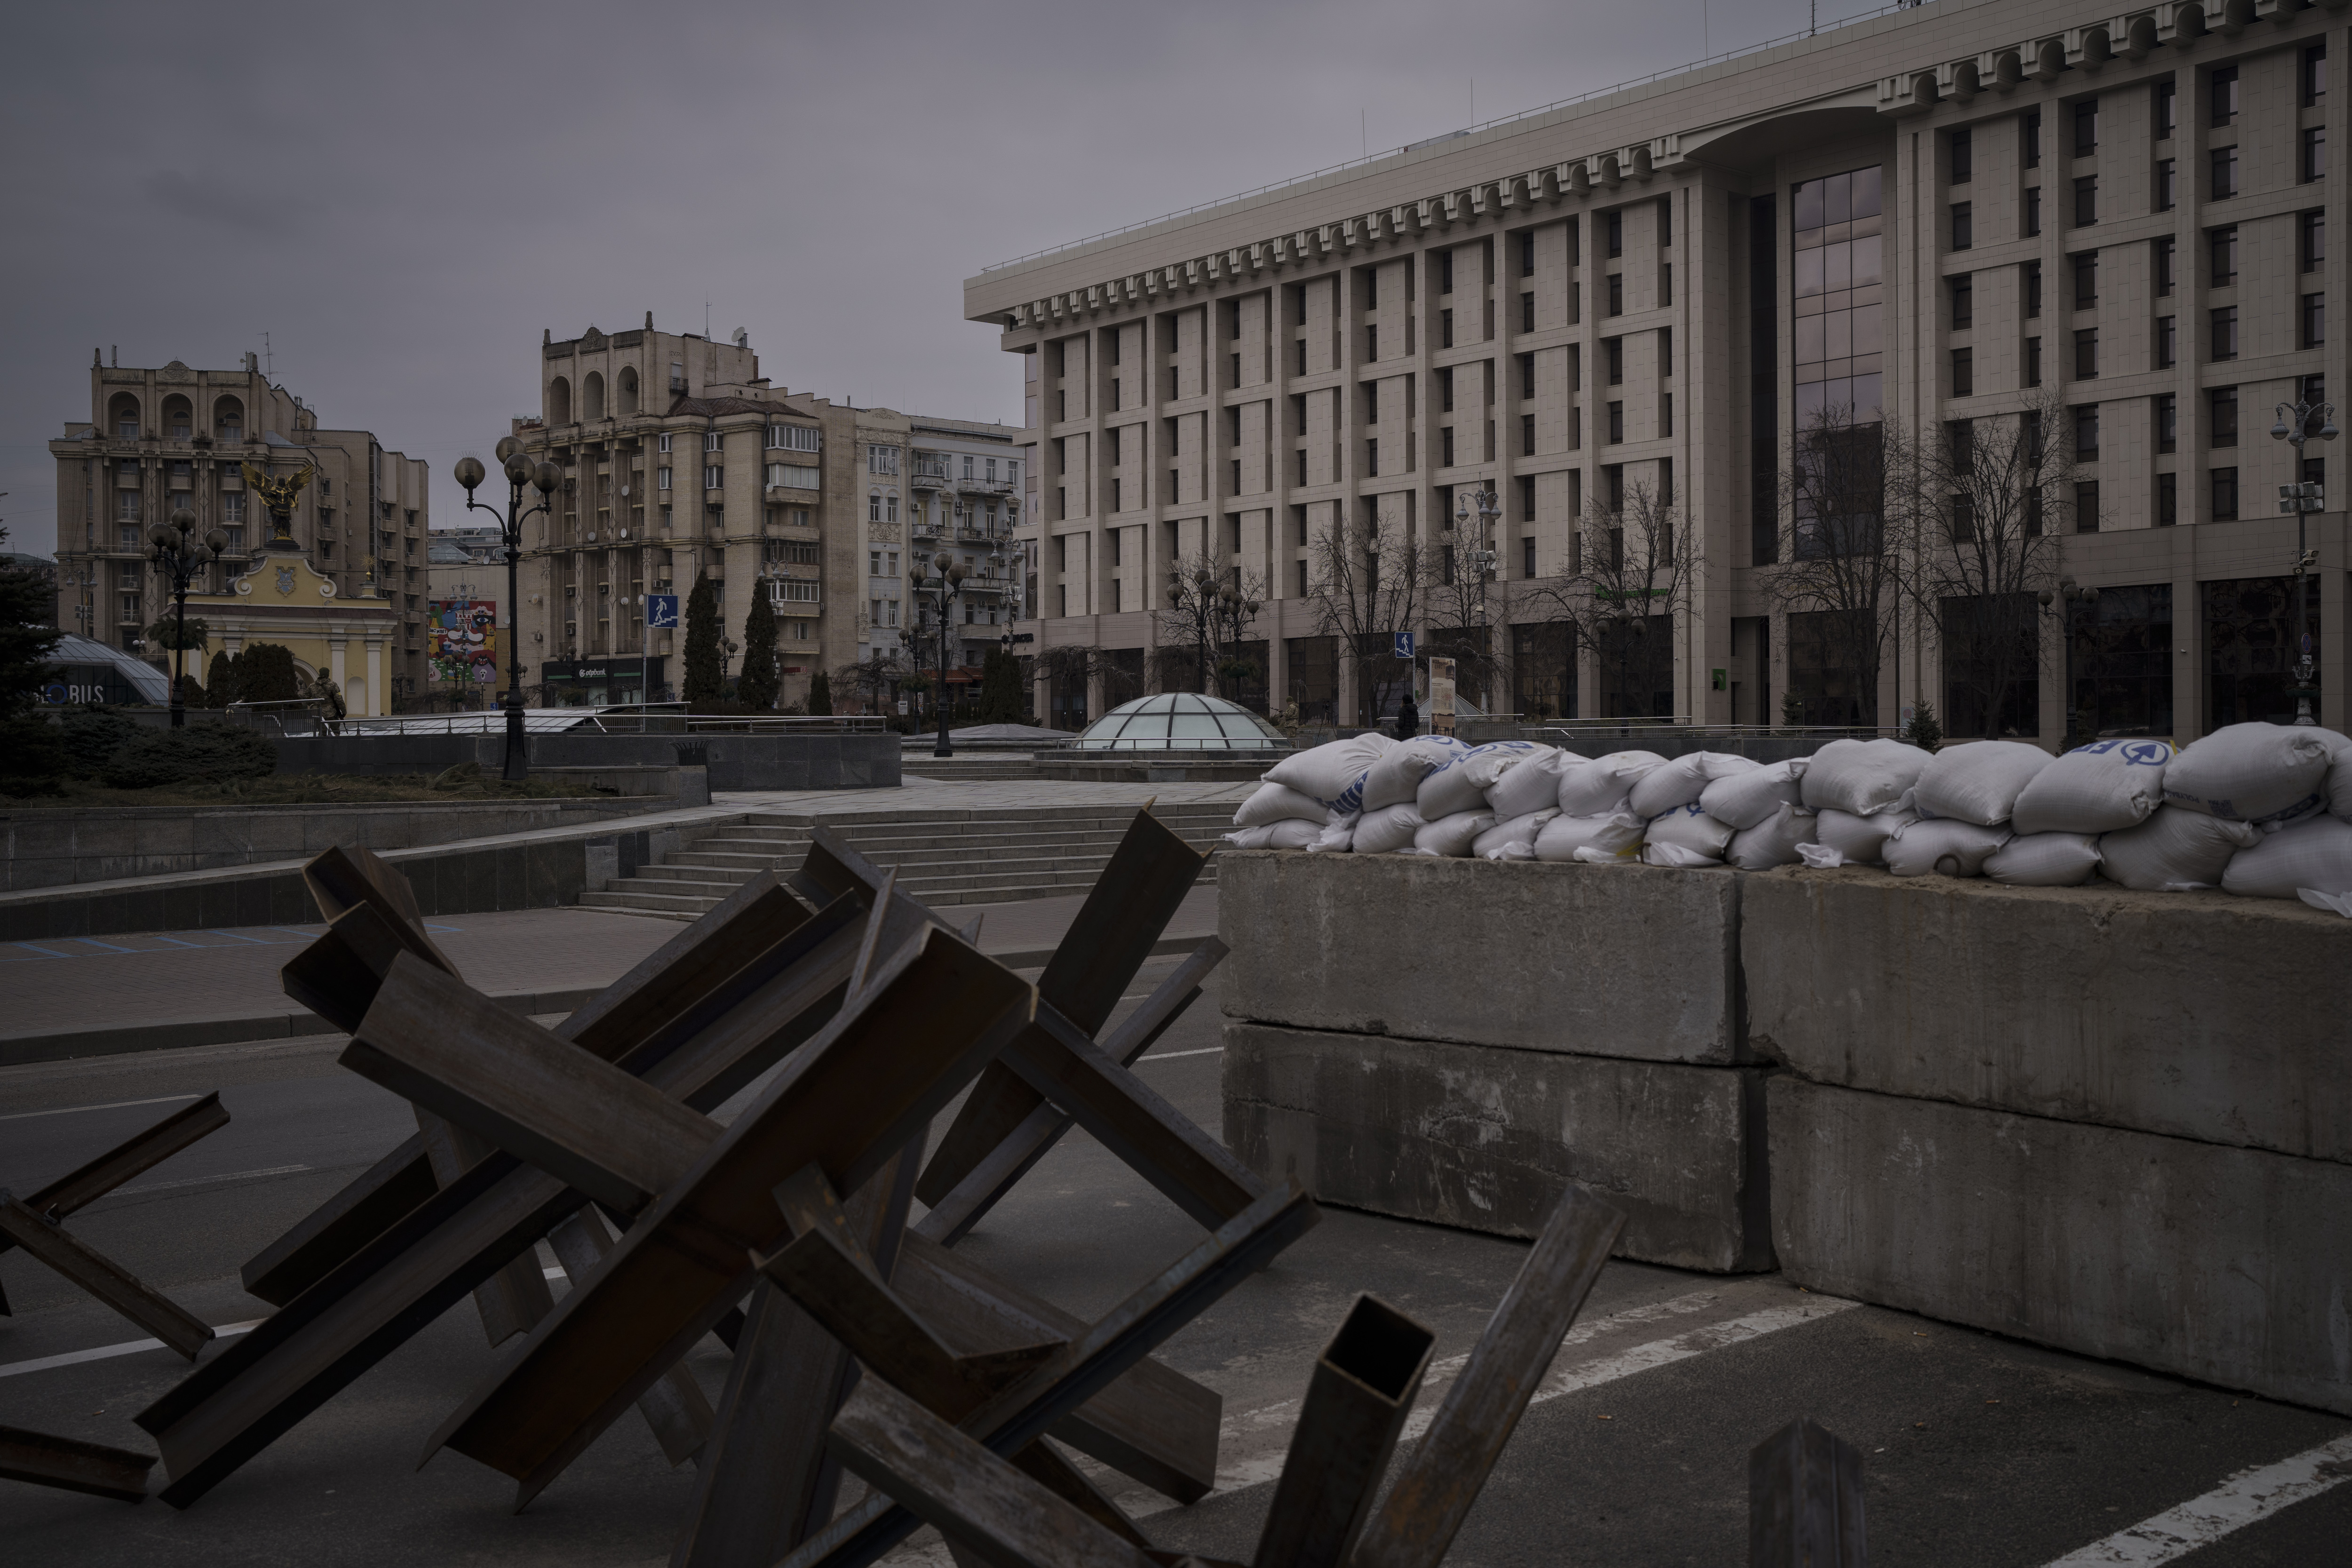 Barricades partially block the main road in front of the Maidan Square, nearly empty during an air raid alarm in Kyiv, Ukraine, Wednesday, March 9, 2022 